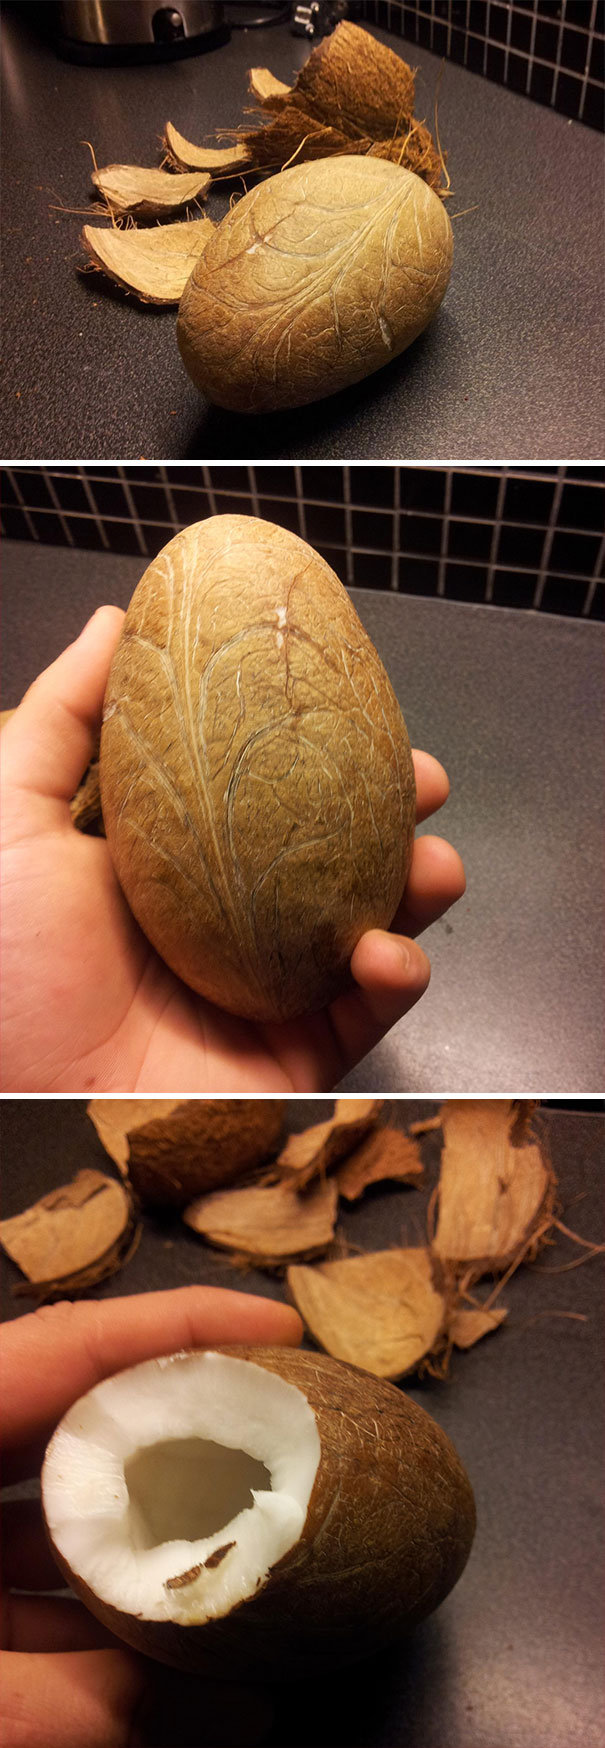 So, I Just Peeled A Coconut Without Breaking It